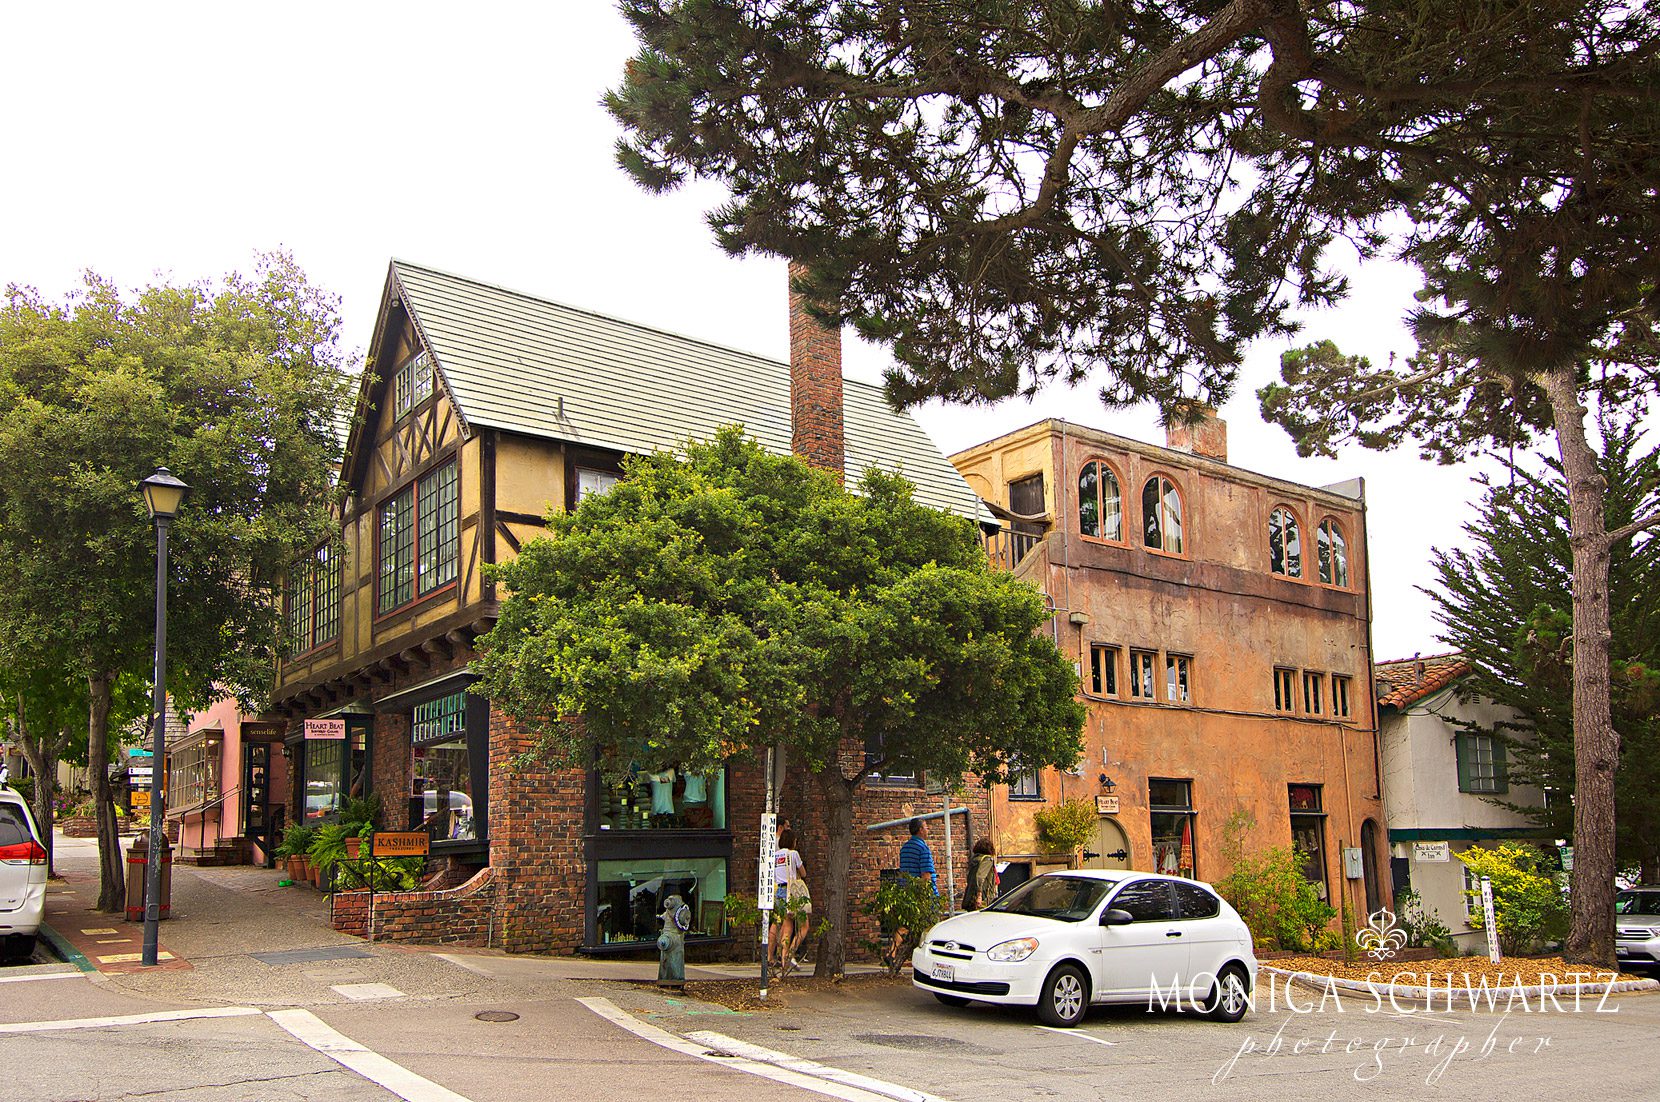 Pretty-fairy-tale-style-building-and-shops-in-Carmel-by-the-Sea-California